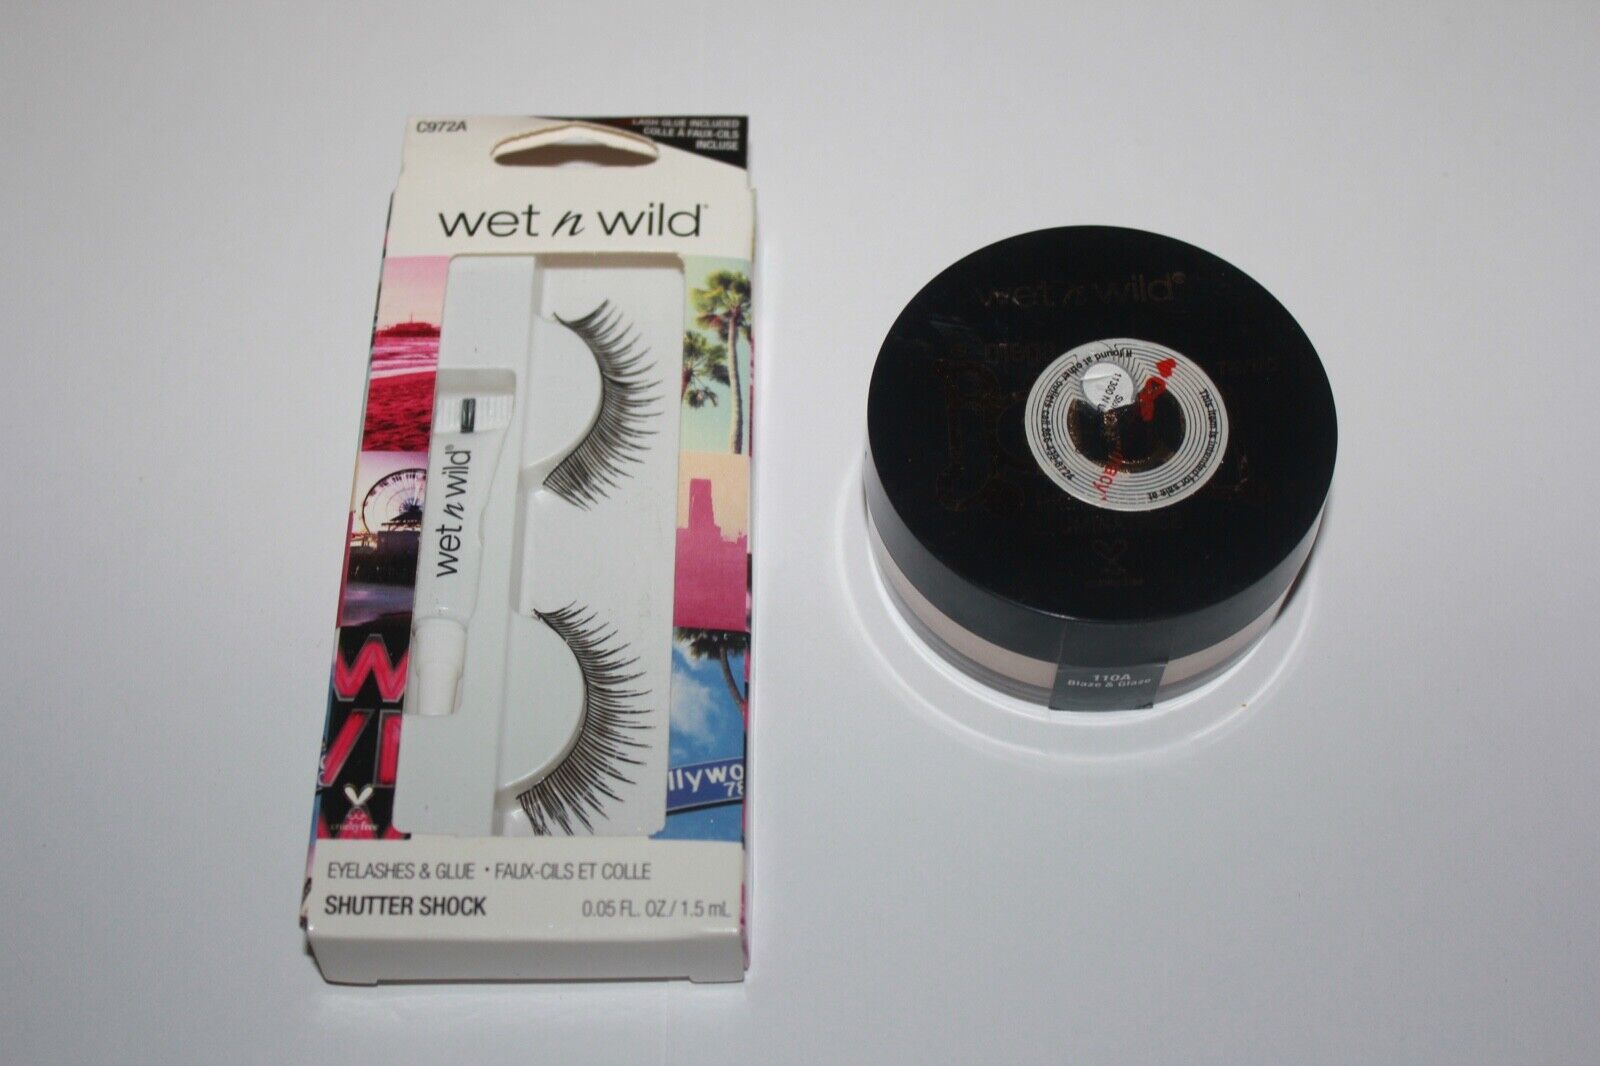 Primary image for Wet n Wild Mega Jelly Highlighter 110A + EyeLashes & Glue C972A Sealed